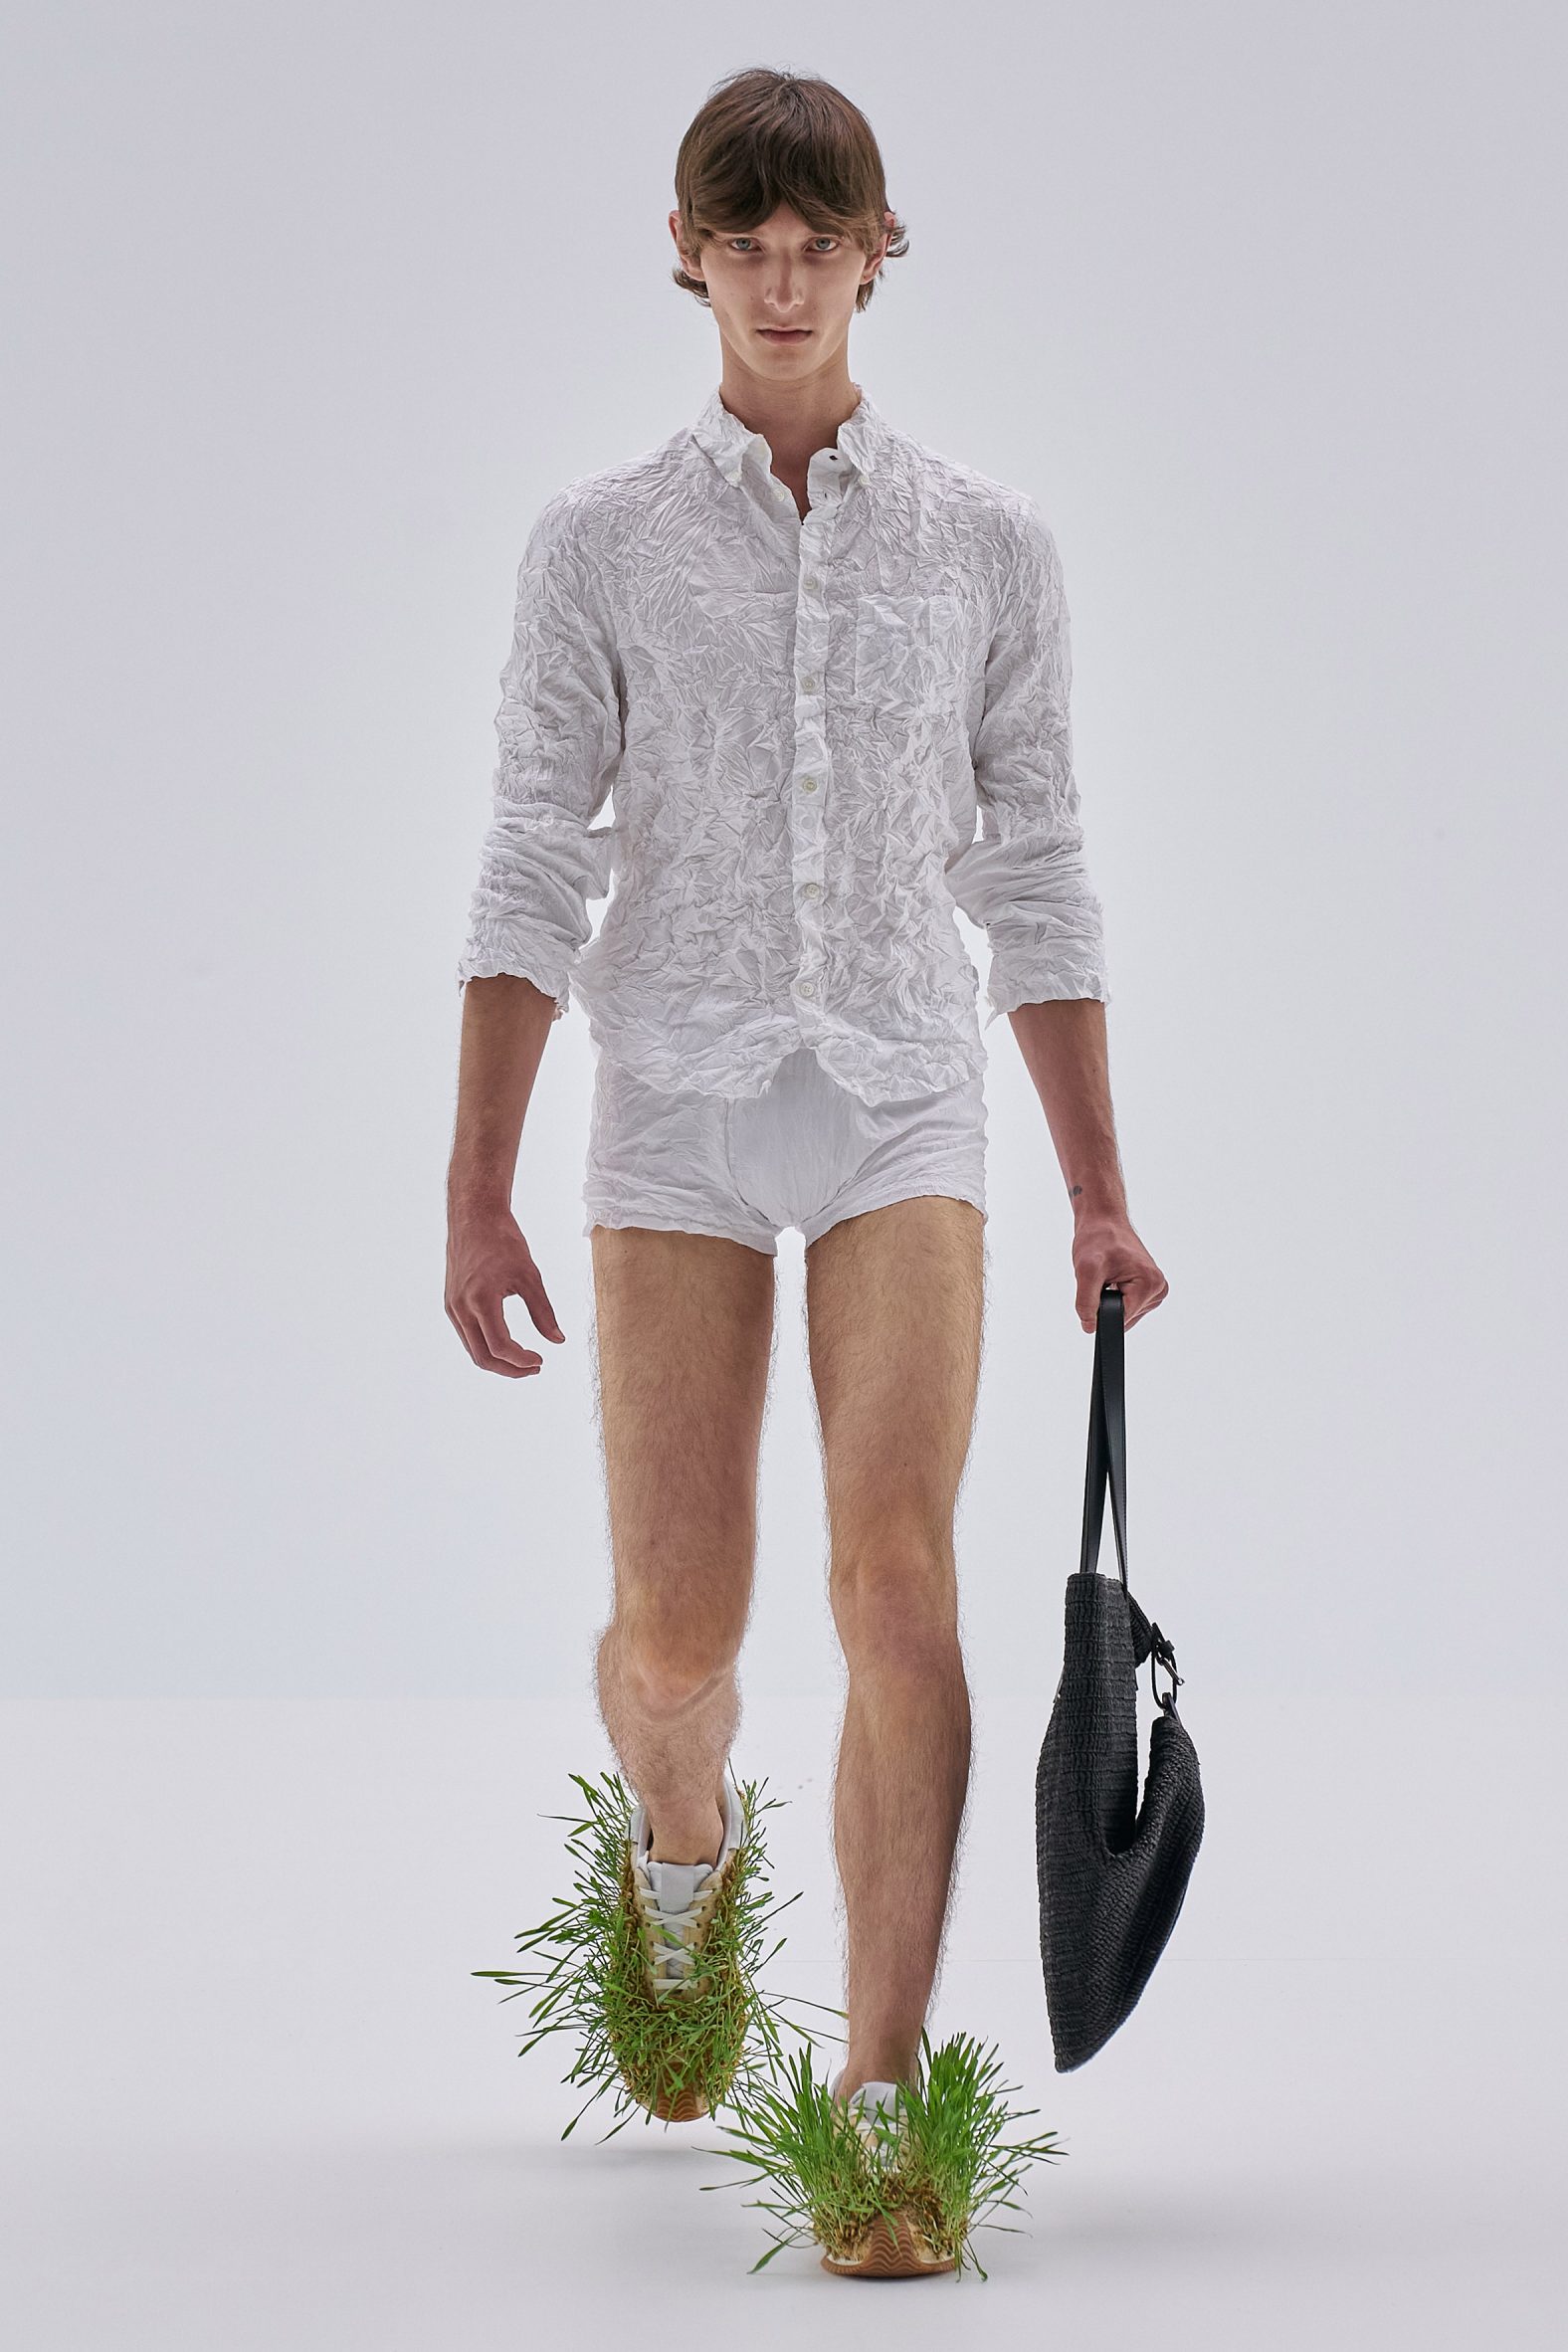 Loewe sprouts grasses and plants from sodden clothes at Paris Fashion Week